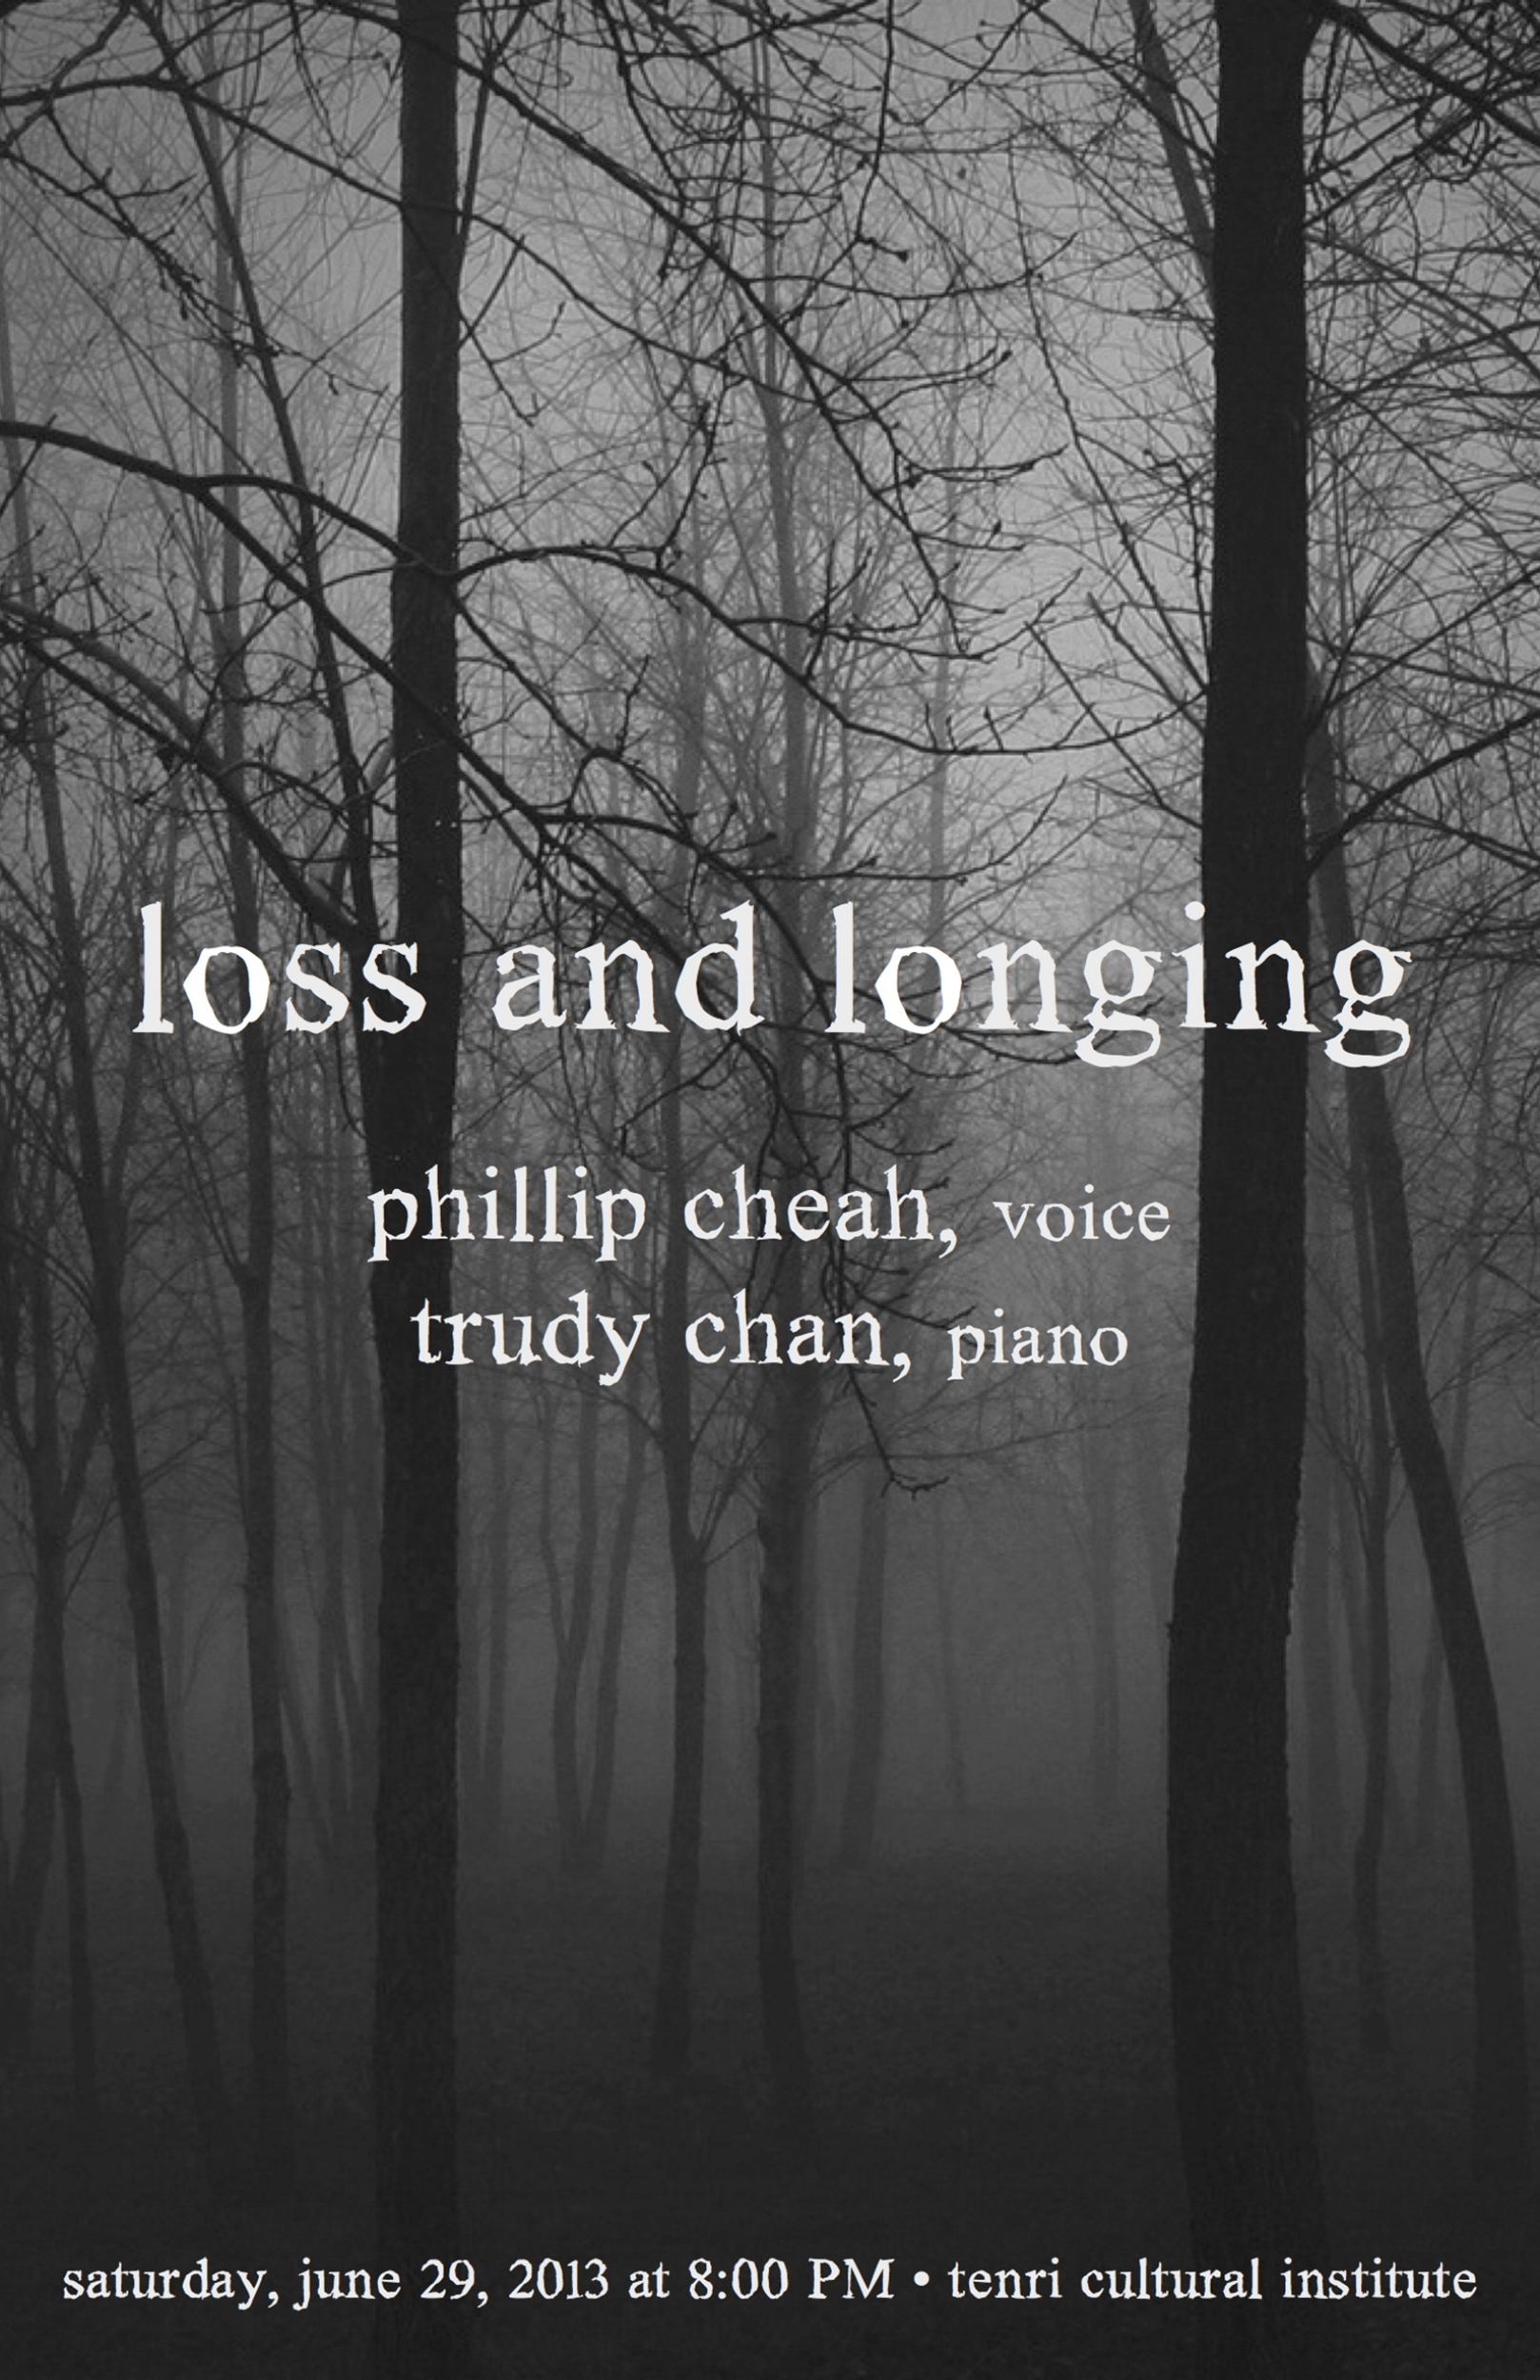 Loss and Longing Programme Cover.jpg